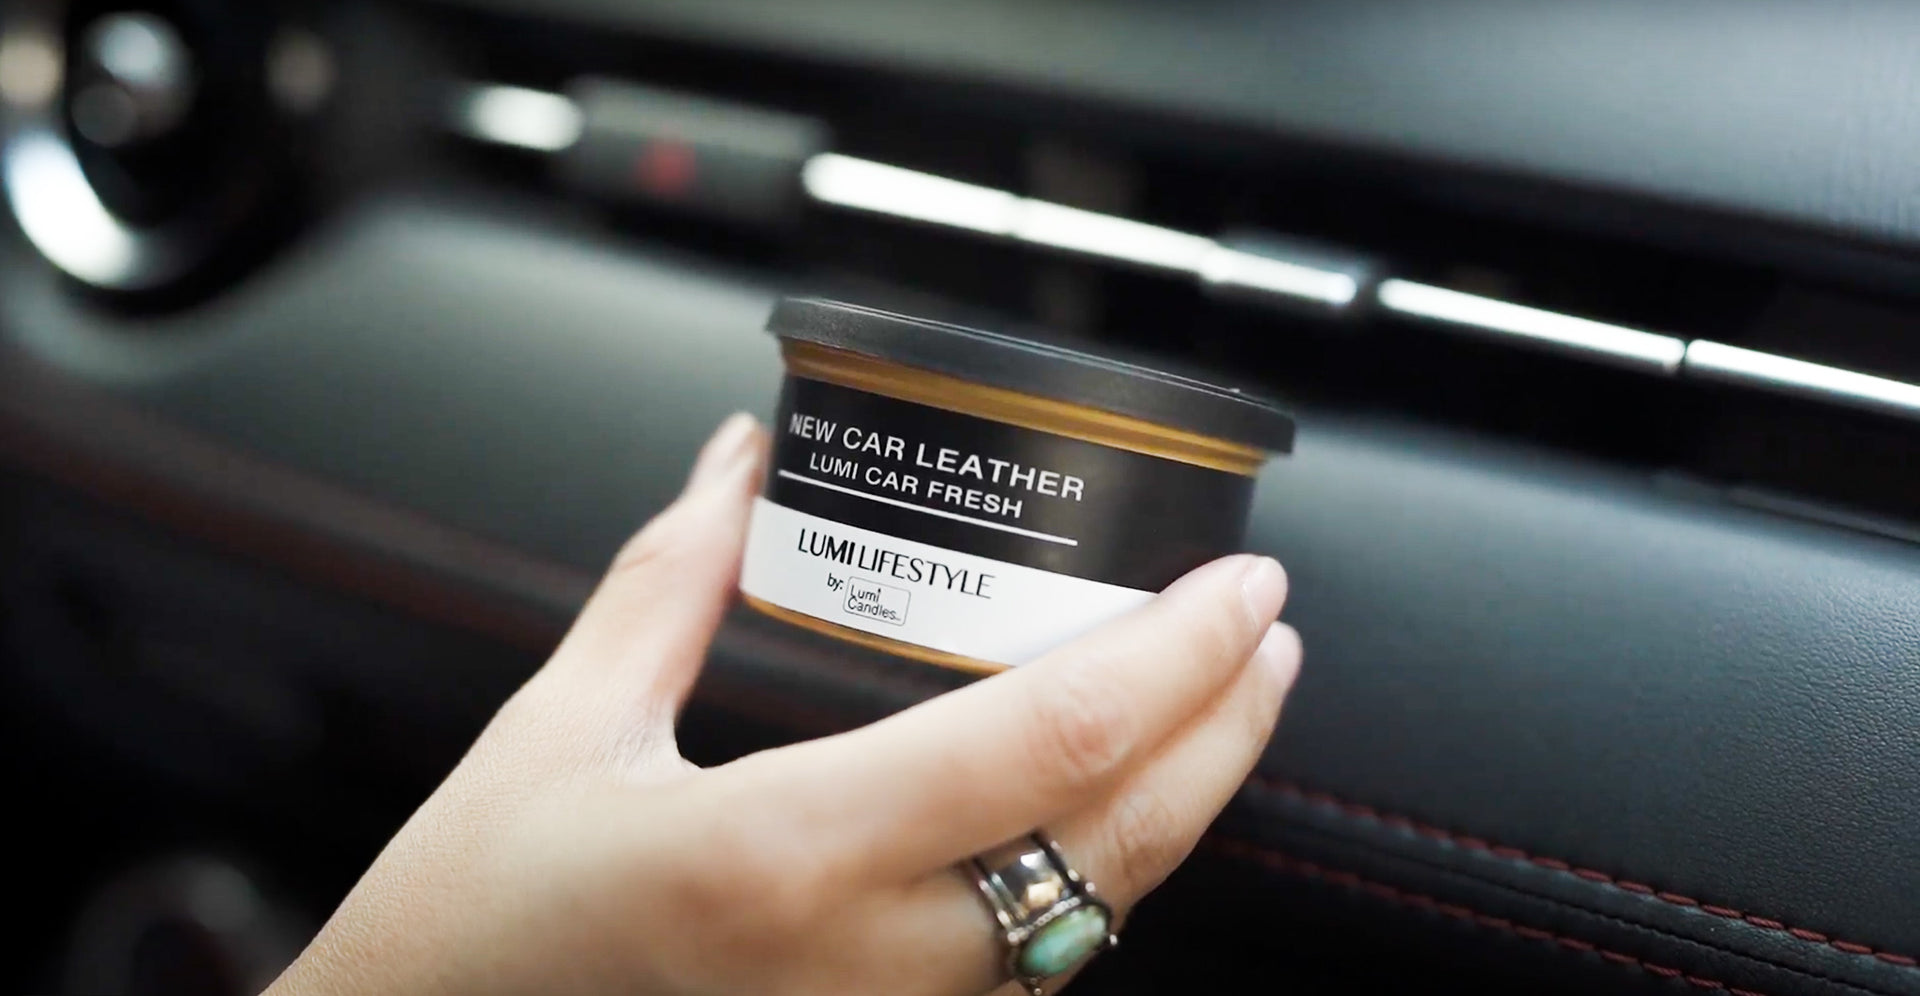 New Car Leather Scent Car Freshener by Lumi Candles PH